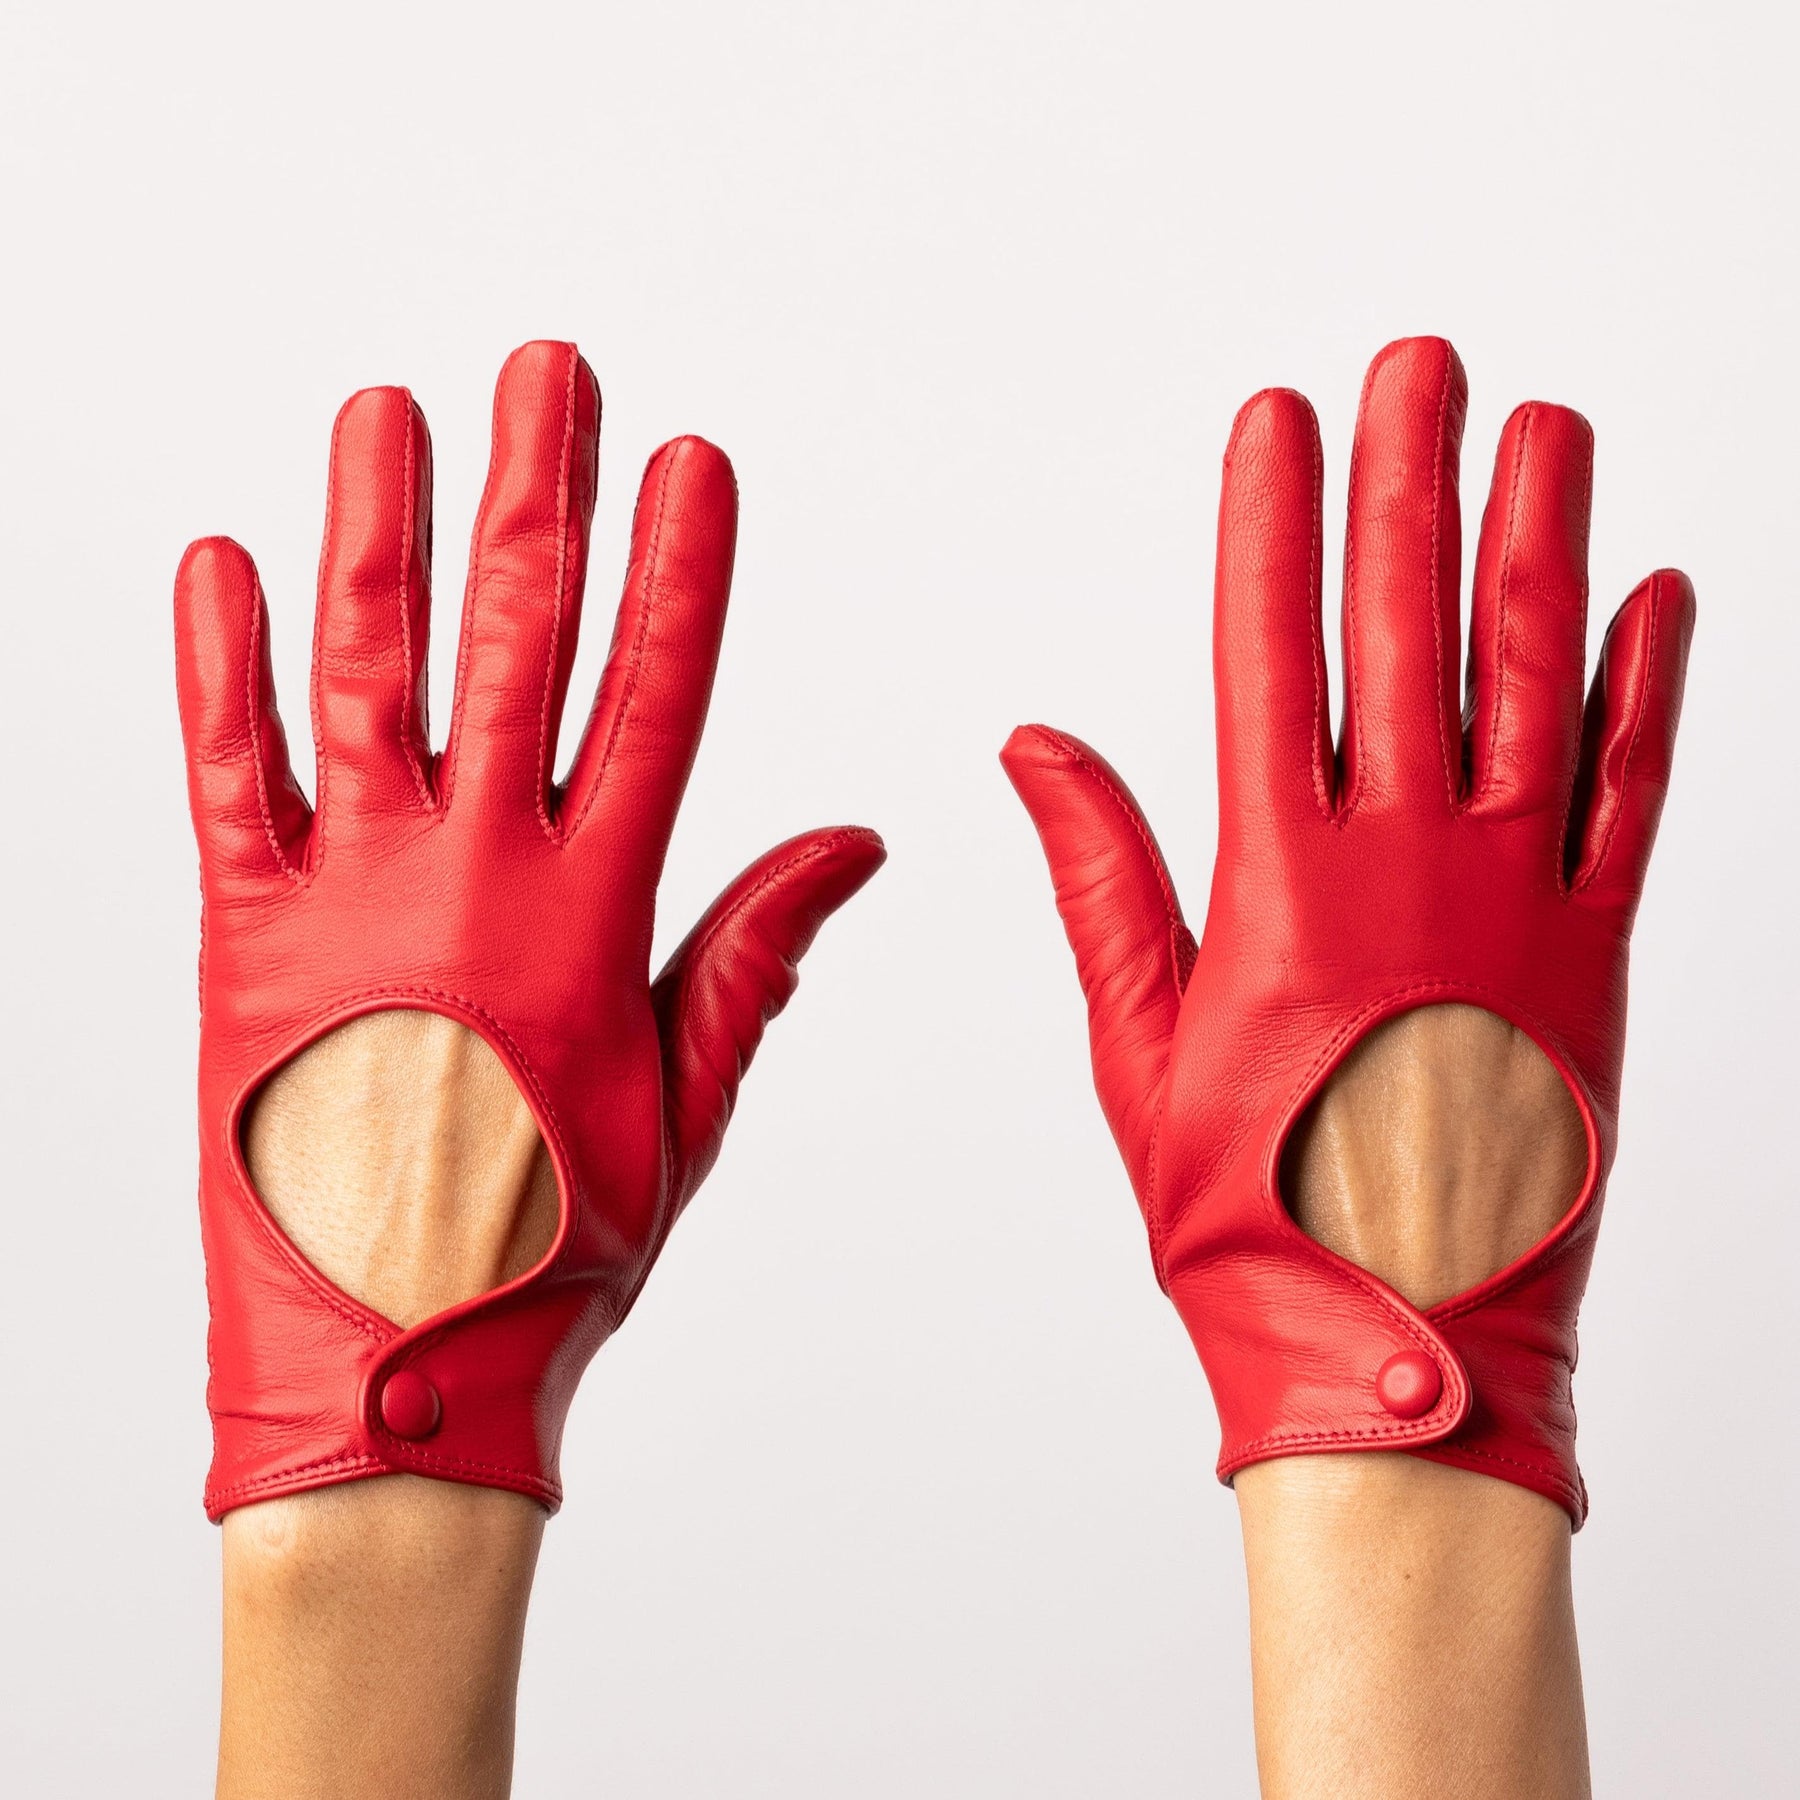 Original Driver Glove, red leather driving gloves.